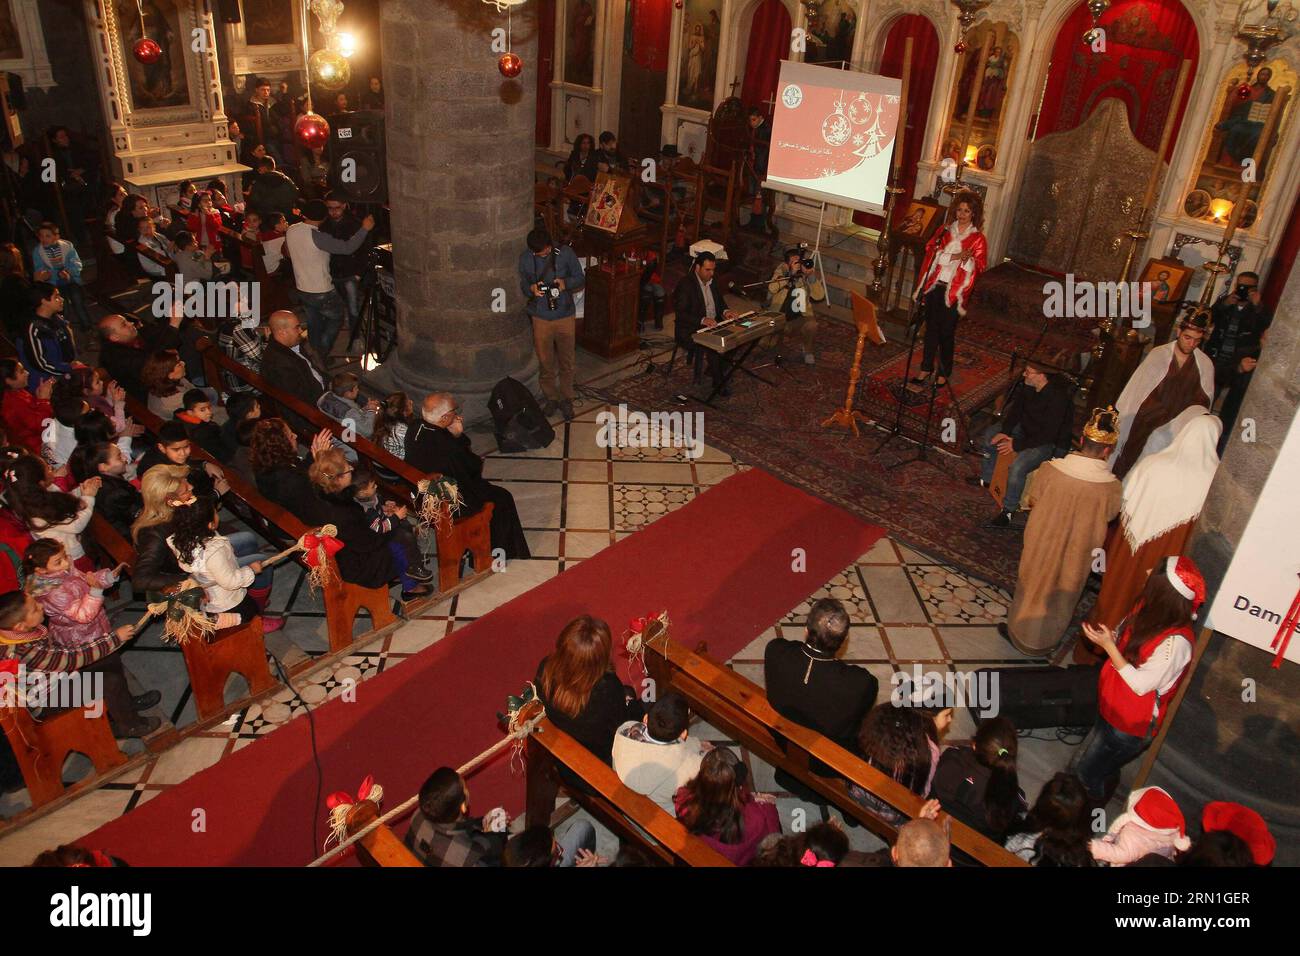 (141230) -- DAMASCUS, Dec. 30, 2014 -- People watch the performance during the Christmas celebration at al-Zaitoun Cathedral in Damascus, capital of Syria, on Dec. 30, 2014. About 1,500 Syrian Christian kids and their parents gathered at al-Zaitoun Cathedral in Syria s capital Damascus to take part in a Christmas celebration. About 10 percent of population in Syria are Christian, who suffered persecution in some parts of the country by the hands of the extremist groups. )(zhf) SYRIA-DAMASCUS-CHRISTIAN-CHRISTMAS CELEBRATION bassemxtellawi PUBLICATIONxNOTxINxCHN   Damascus DEC 30 2014 Celebritie Stock Photo